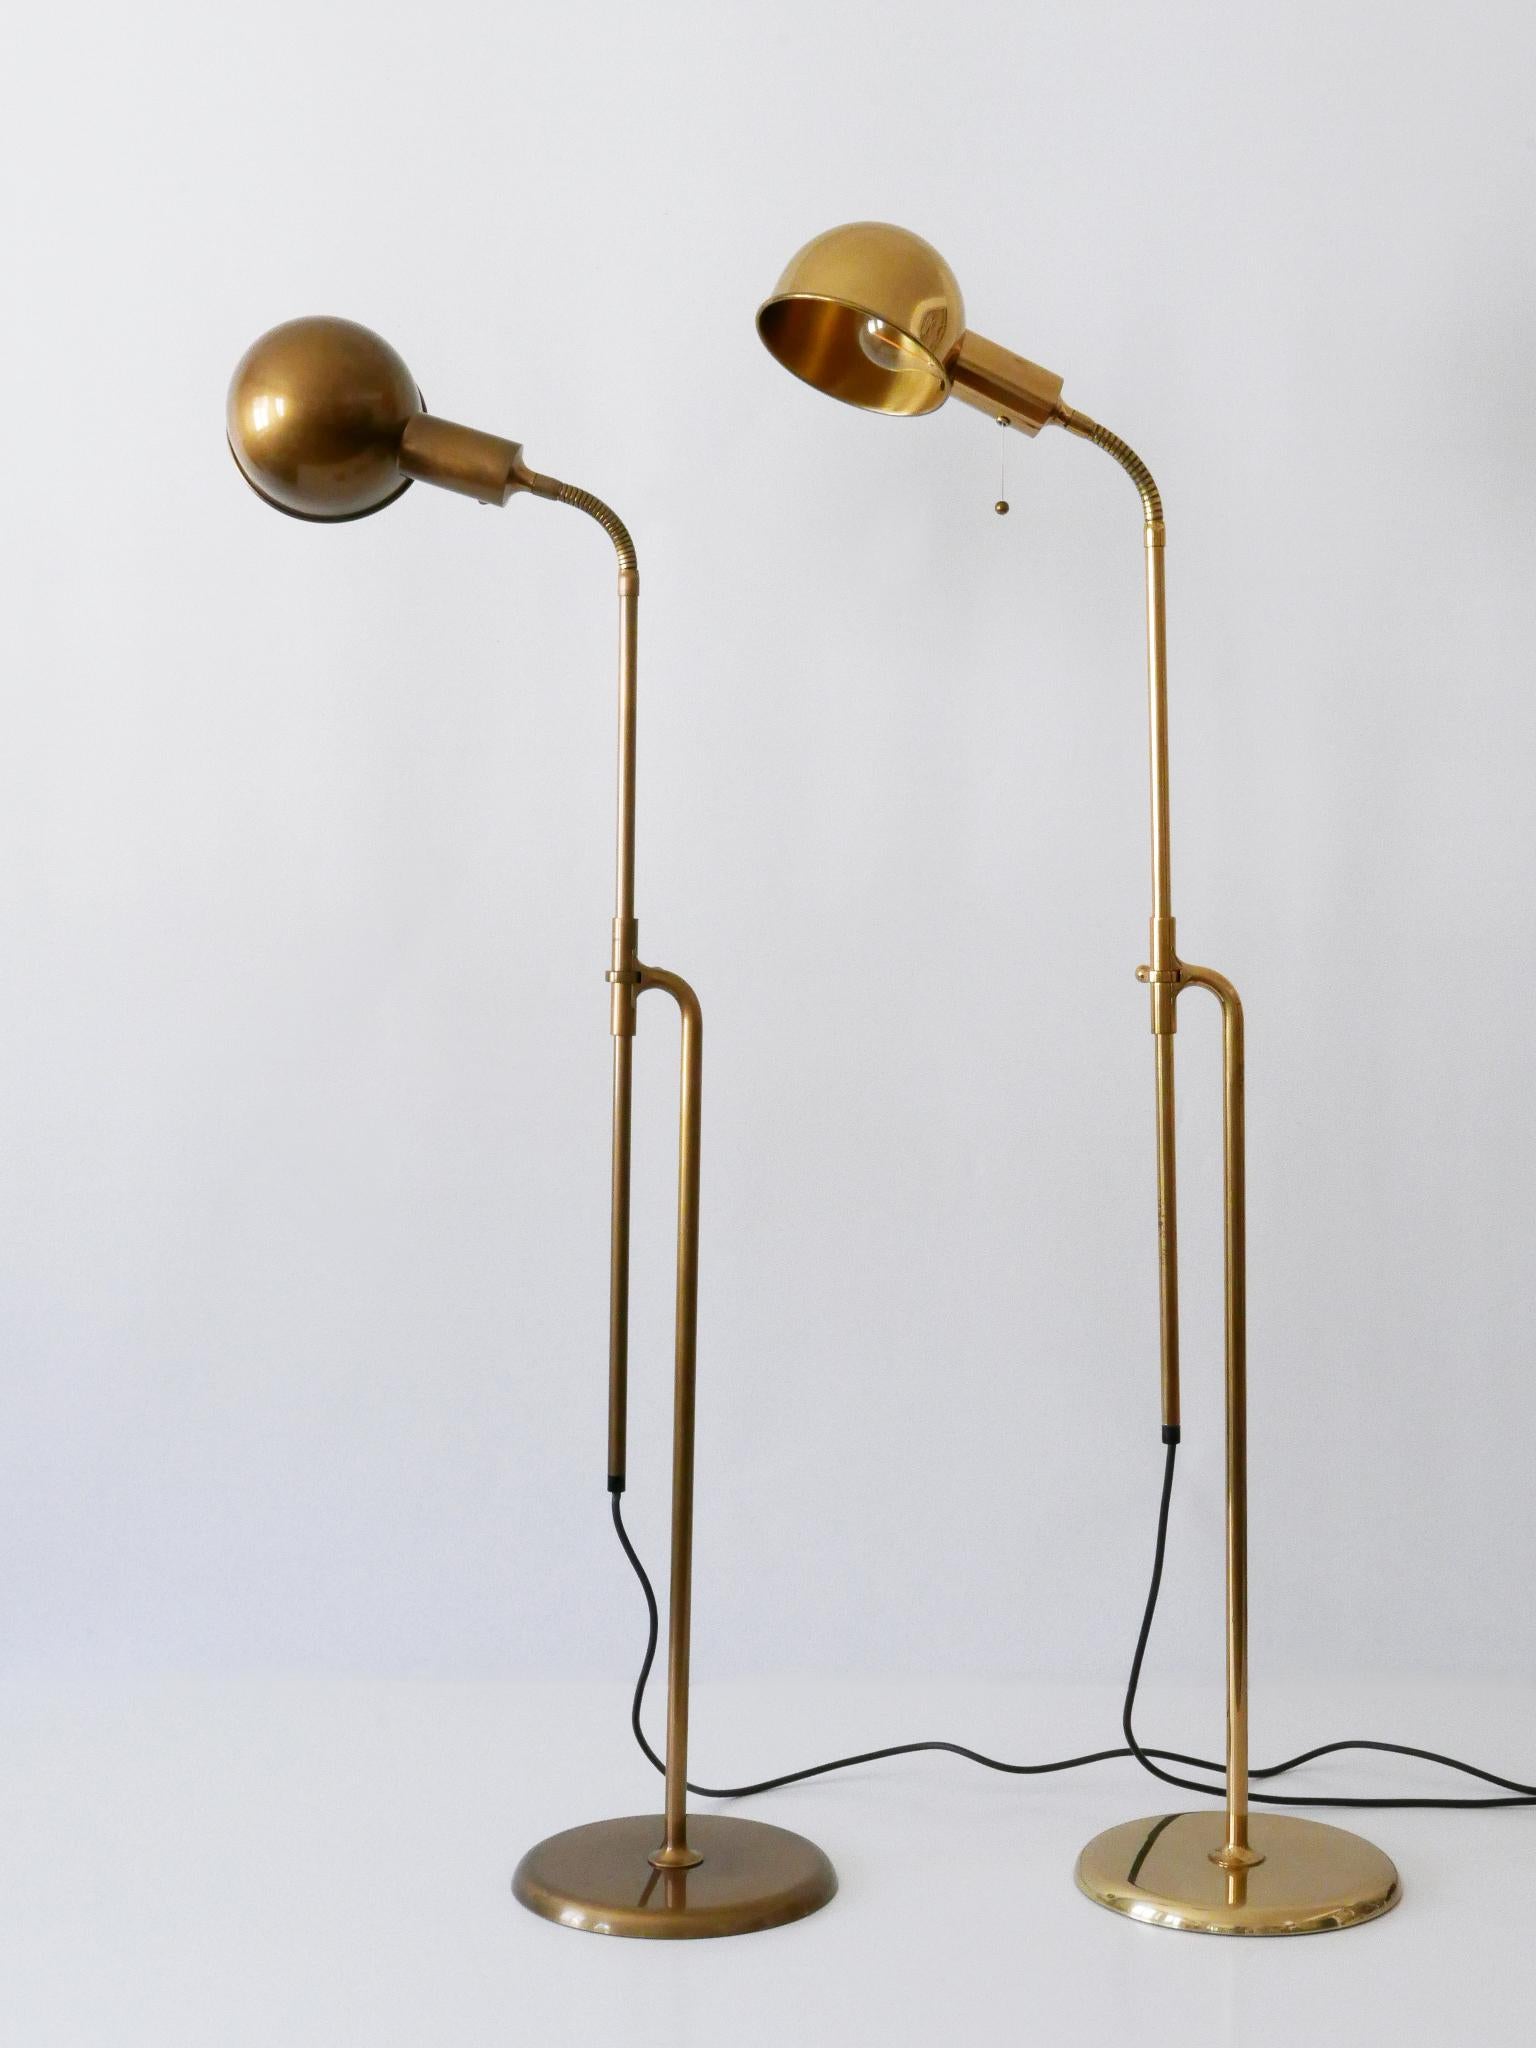 Set of Two Mid-Century Modern Reading Floor Lamps 'Bola' by Florian Schulz 1970s For Sale 5